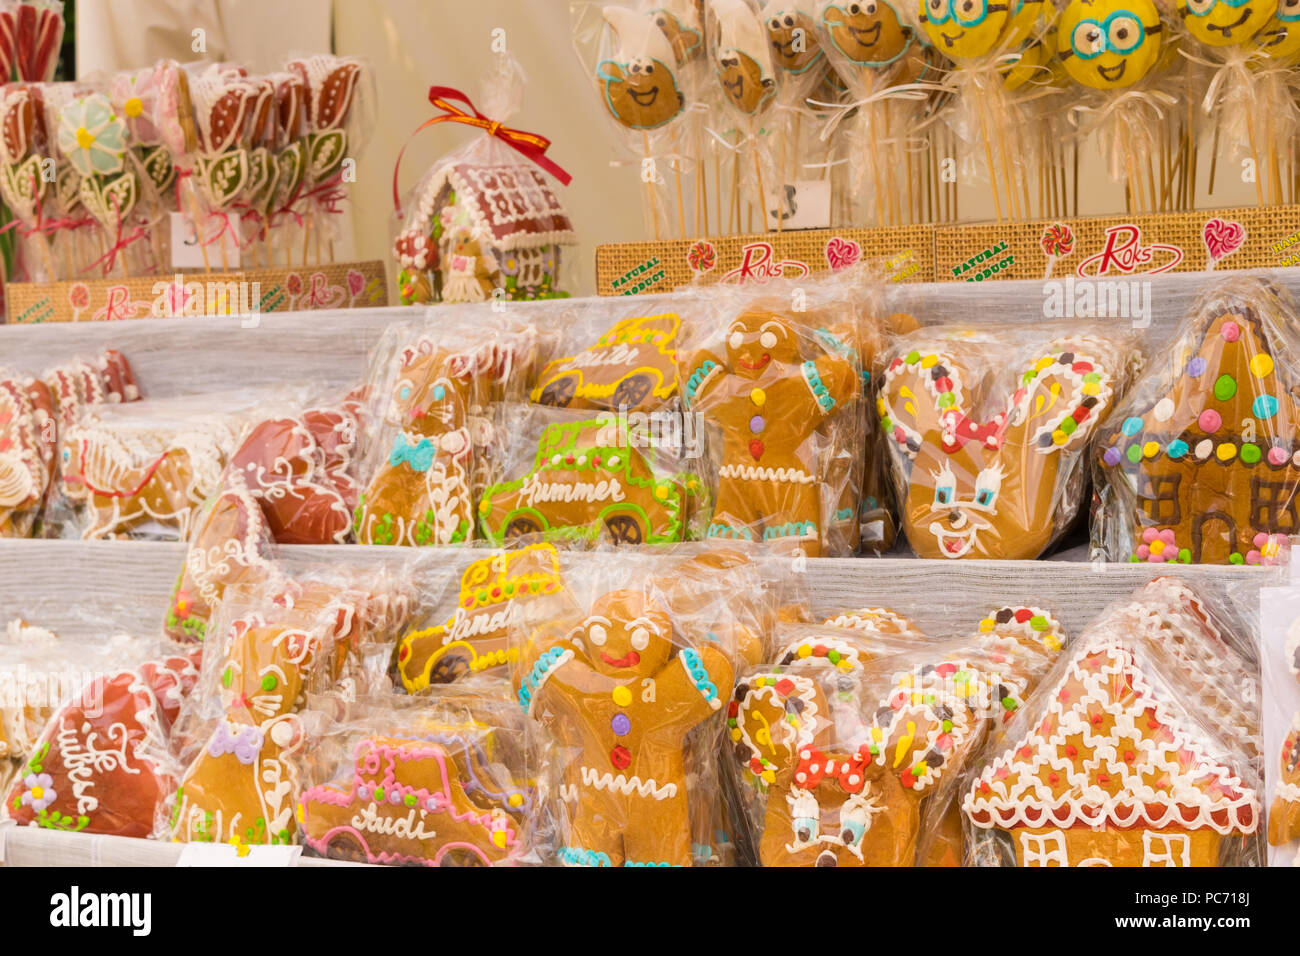 Gingerbreads in heart, car, house, cartoon characters and gingerbread man shapes displayed for sale and wrapped in protective plastic foil. Stock Photo